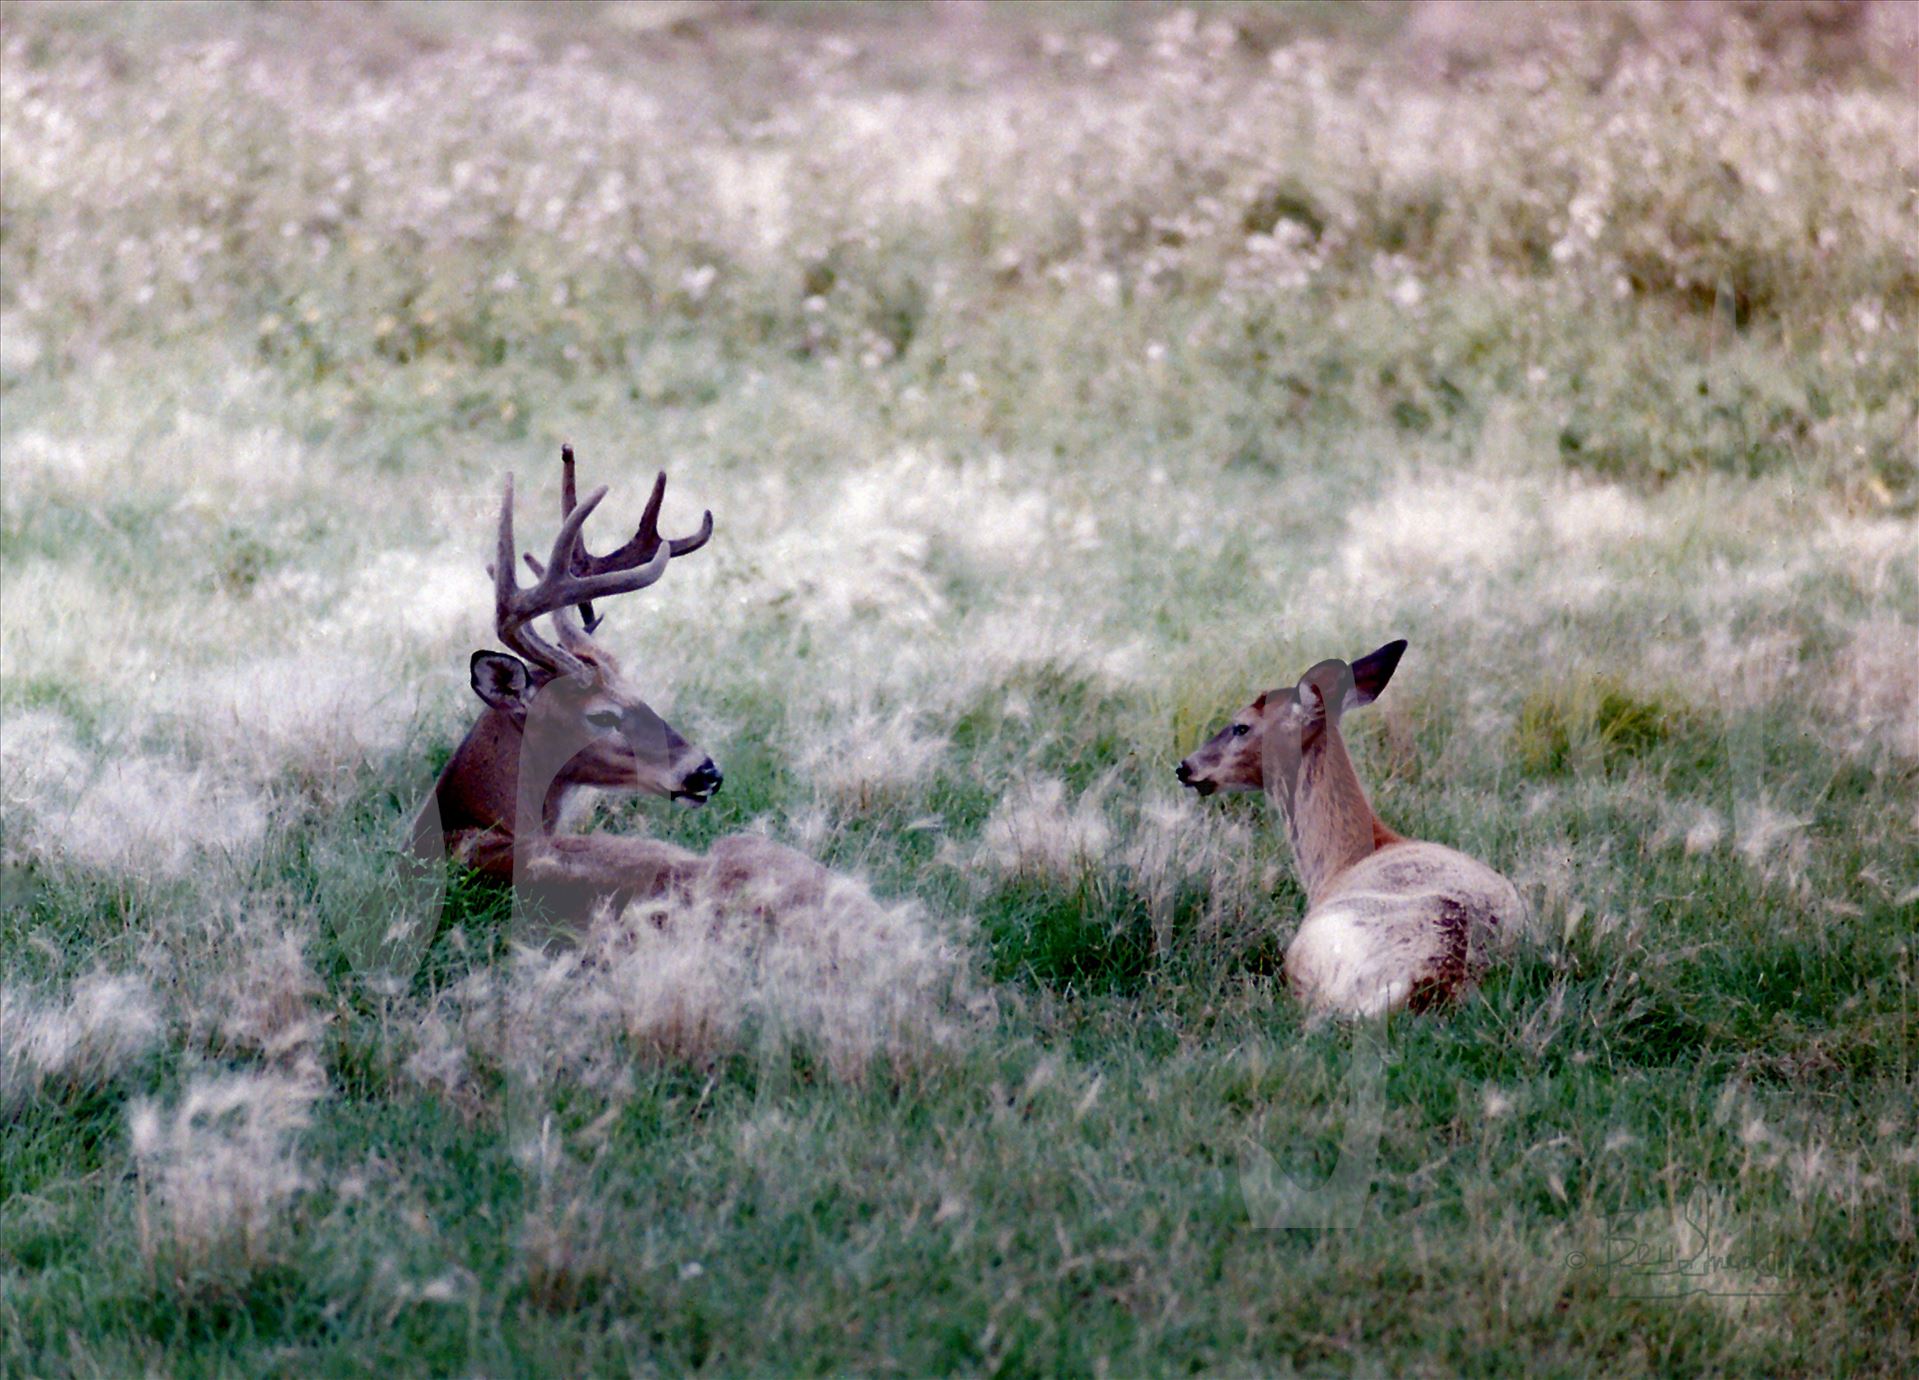 Buck and Doe 010 - Buck and Doe laying in shimmering tall white wild grasses by Snookies Place of Wildlife and Nature